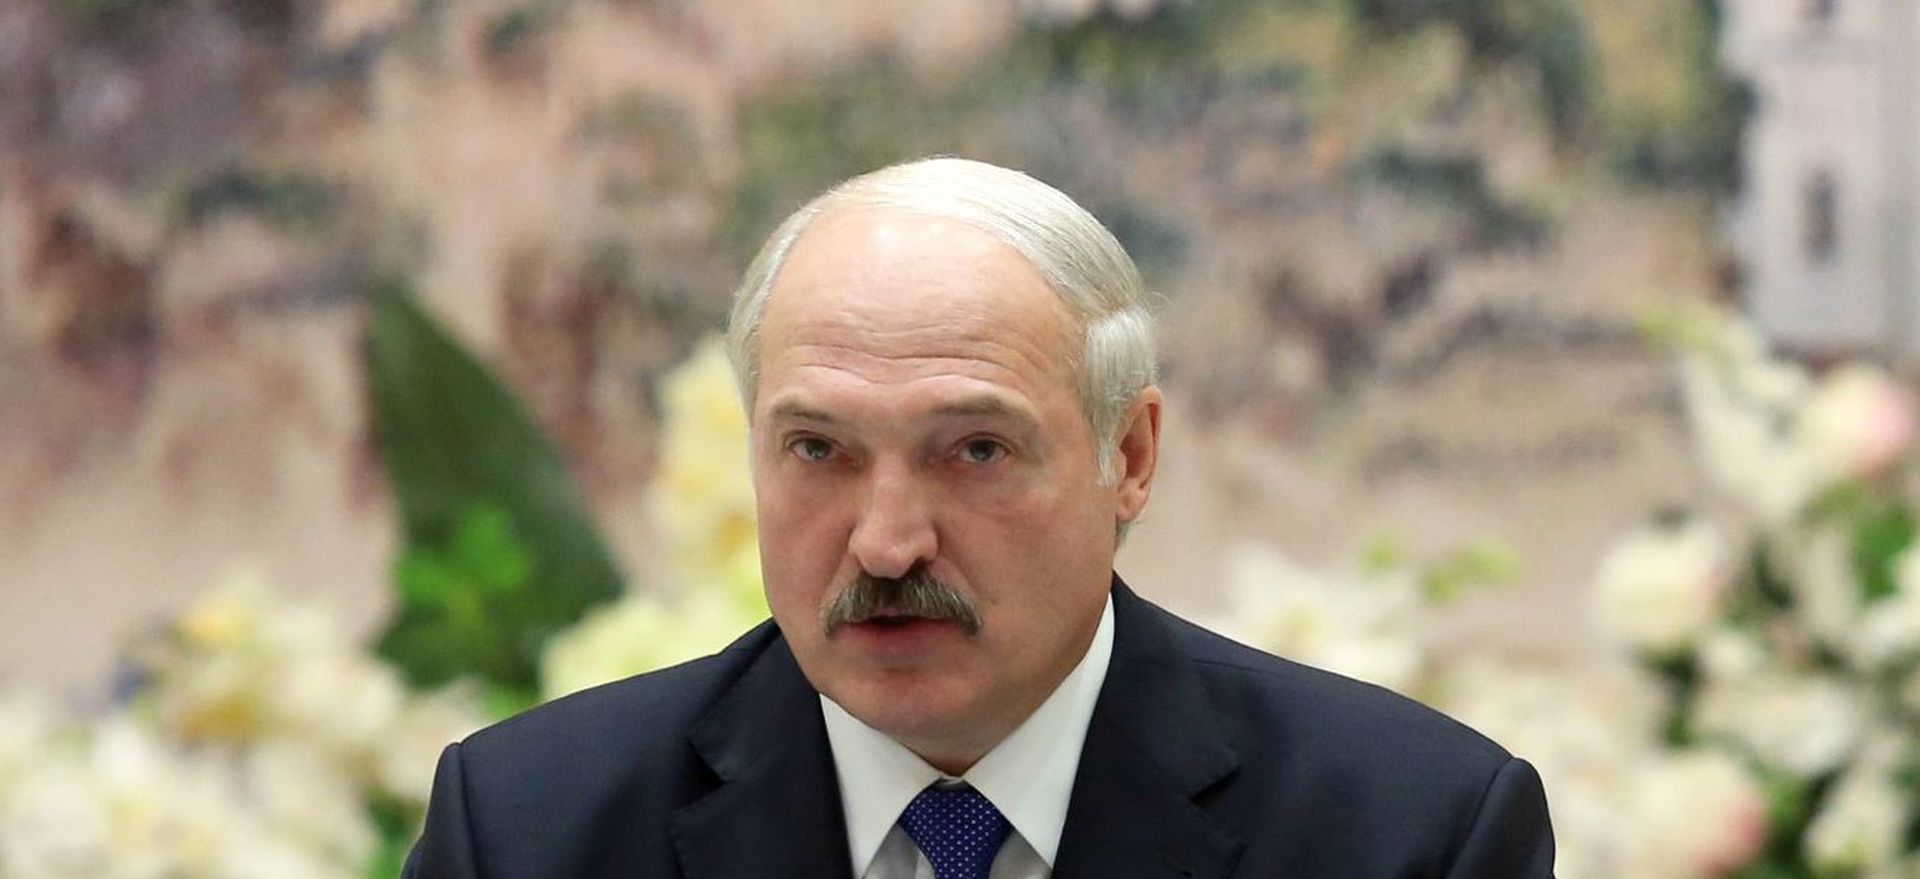 epa04961056 Belarussian President Alexander Lukashenko delivers his speech during a ceremony of 'Prayer for Belarus' at the temple-monument in honor of All Saints in Minsk, Belarus, 02 October 2015.  EPA/NIKOLAI PETROV/BELTA / POOL